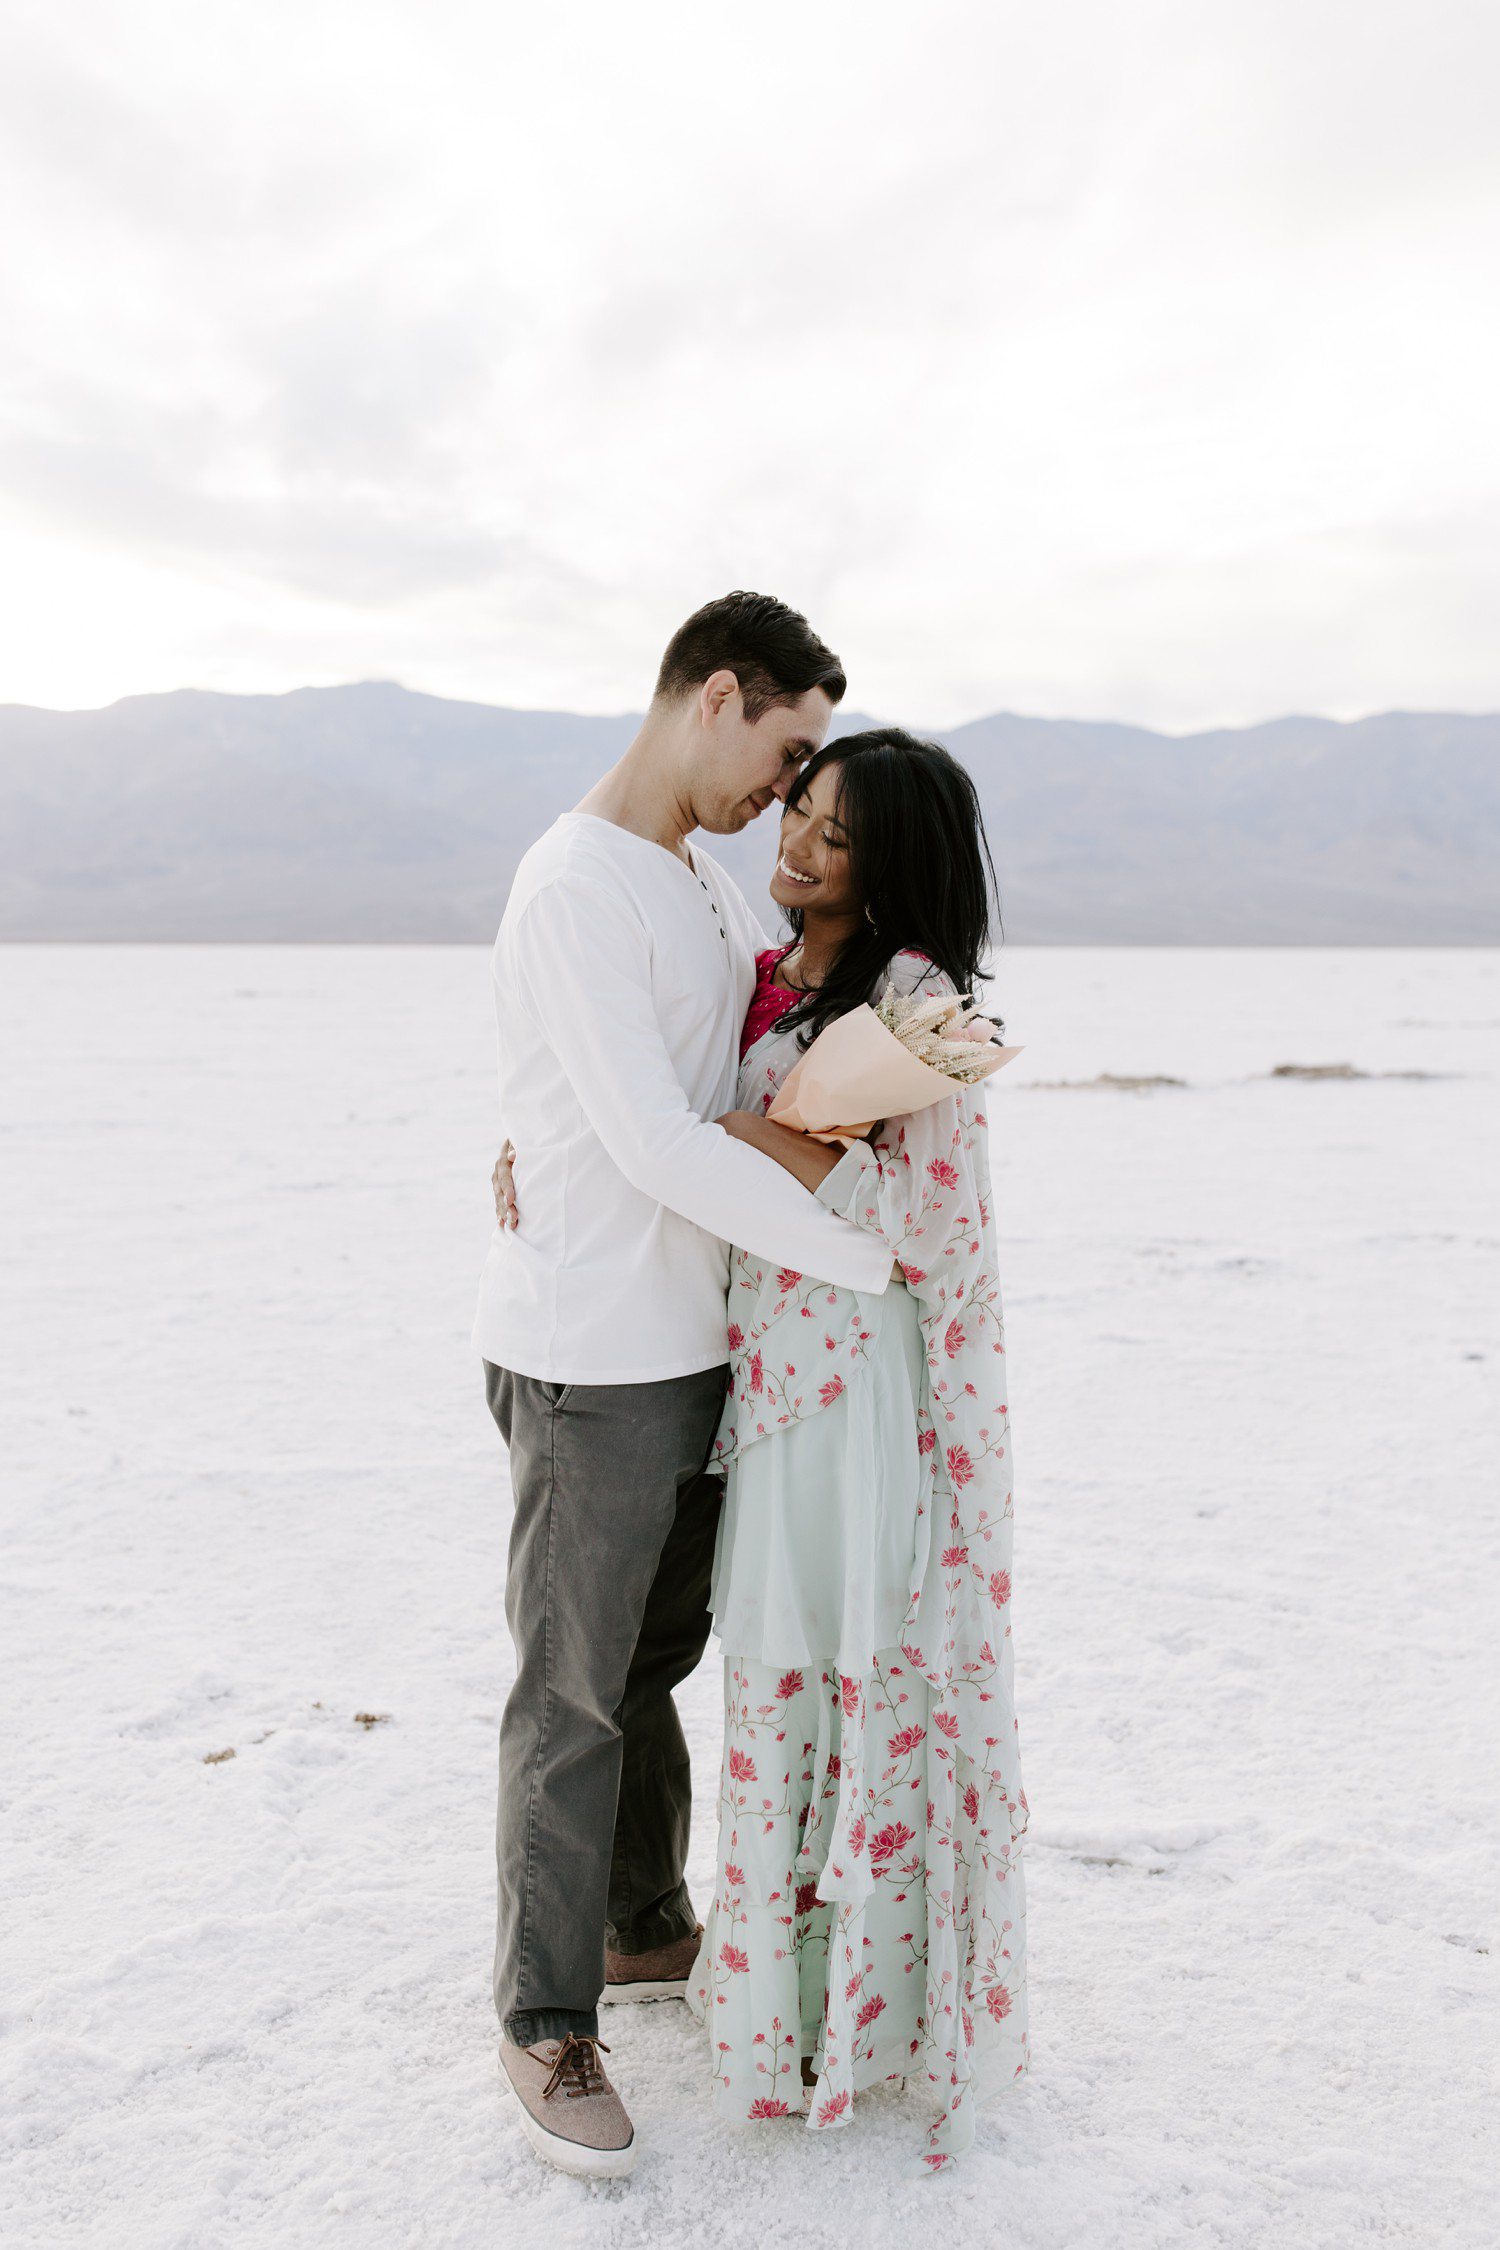 Death Valley Engagement Photos at Badwater Basin